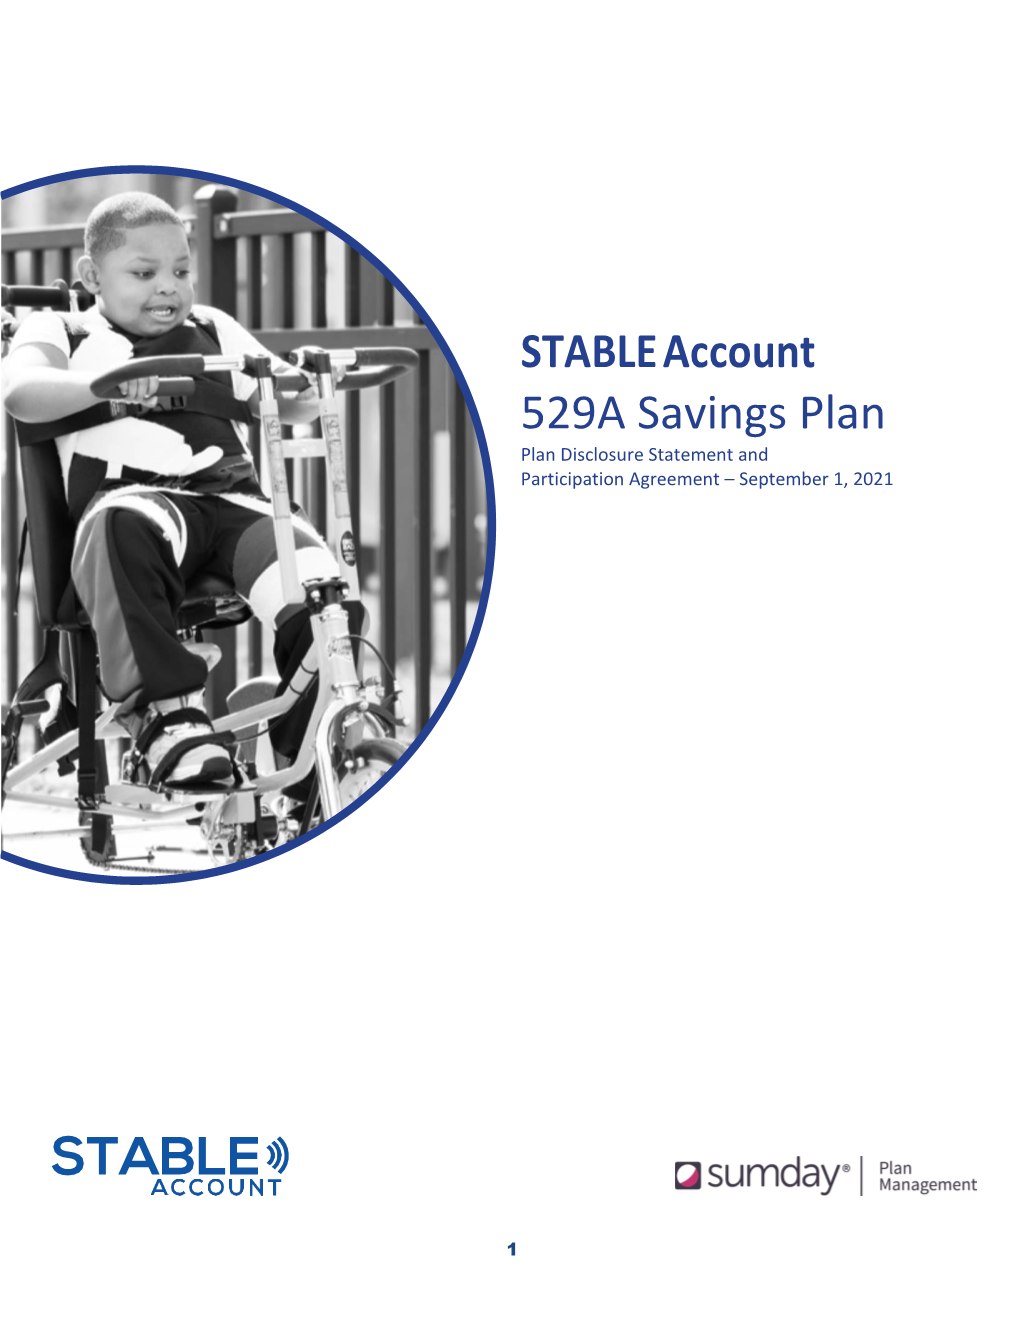 STABLE Account 529A Savings Plan Plan Disclosure Statement and Participation Agreement – September 1, 2021